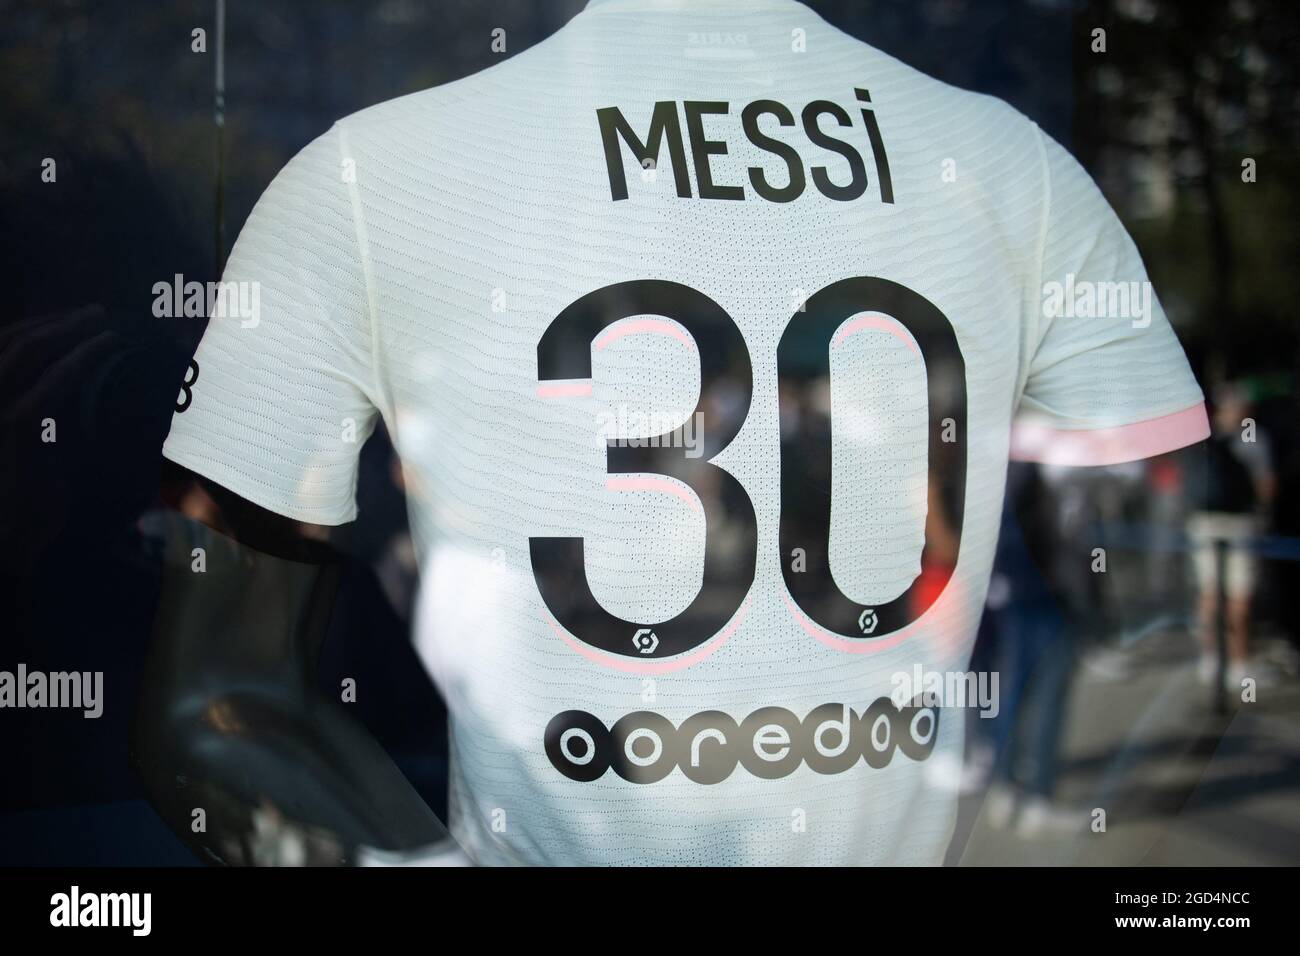 Paris, France. 11th Aug, 2021. Close up of the jersey of PSG's Argentinian football player Lionel Messi at the Paris-Saint-Germain (PSG) football club store on the Champs Elysees avenue in Paris on August 11, 2021. Messi signed on August 10, 2021 a two-year deal with PSG with the option of an additional year. The 34-year-old will wear the number 30 in Paris, the number he had when he began his professional career at Barca. Photo by Raphael Lafargue/ABACAPRESS.COM Credit: Abaca Press/Alamy Live News Stock Photo